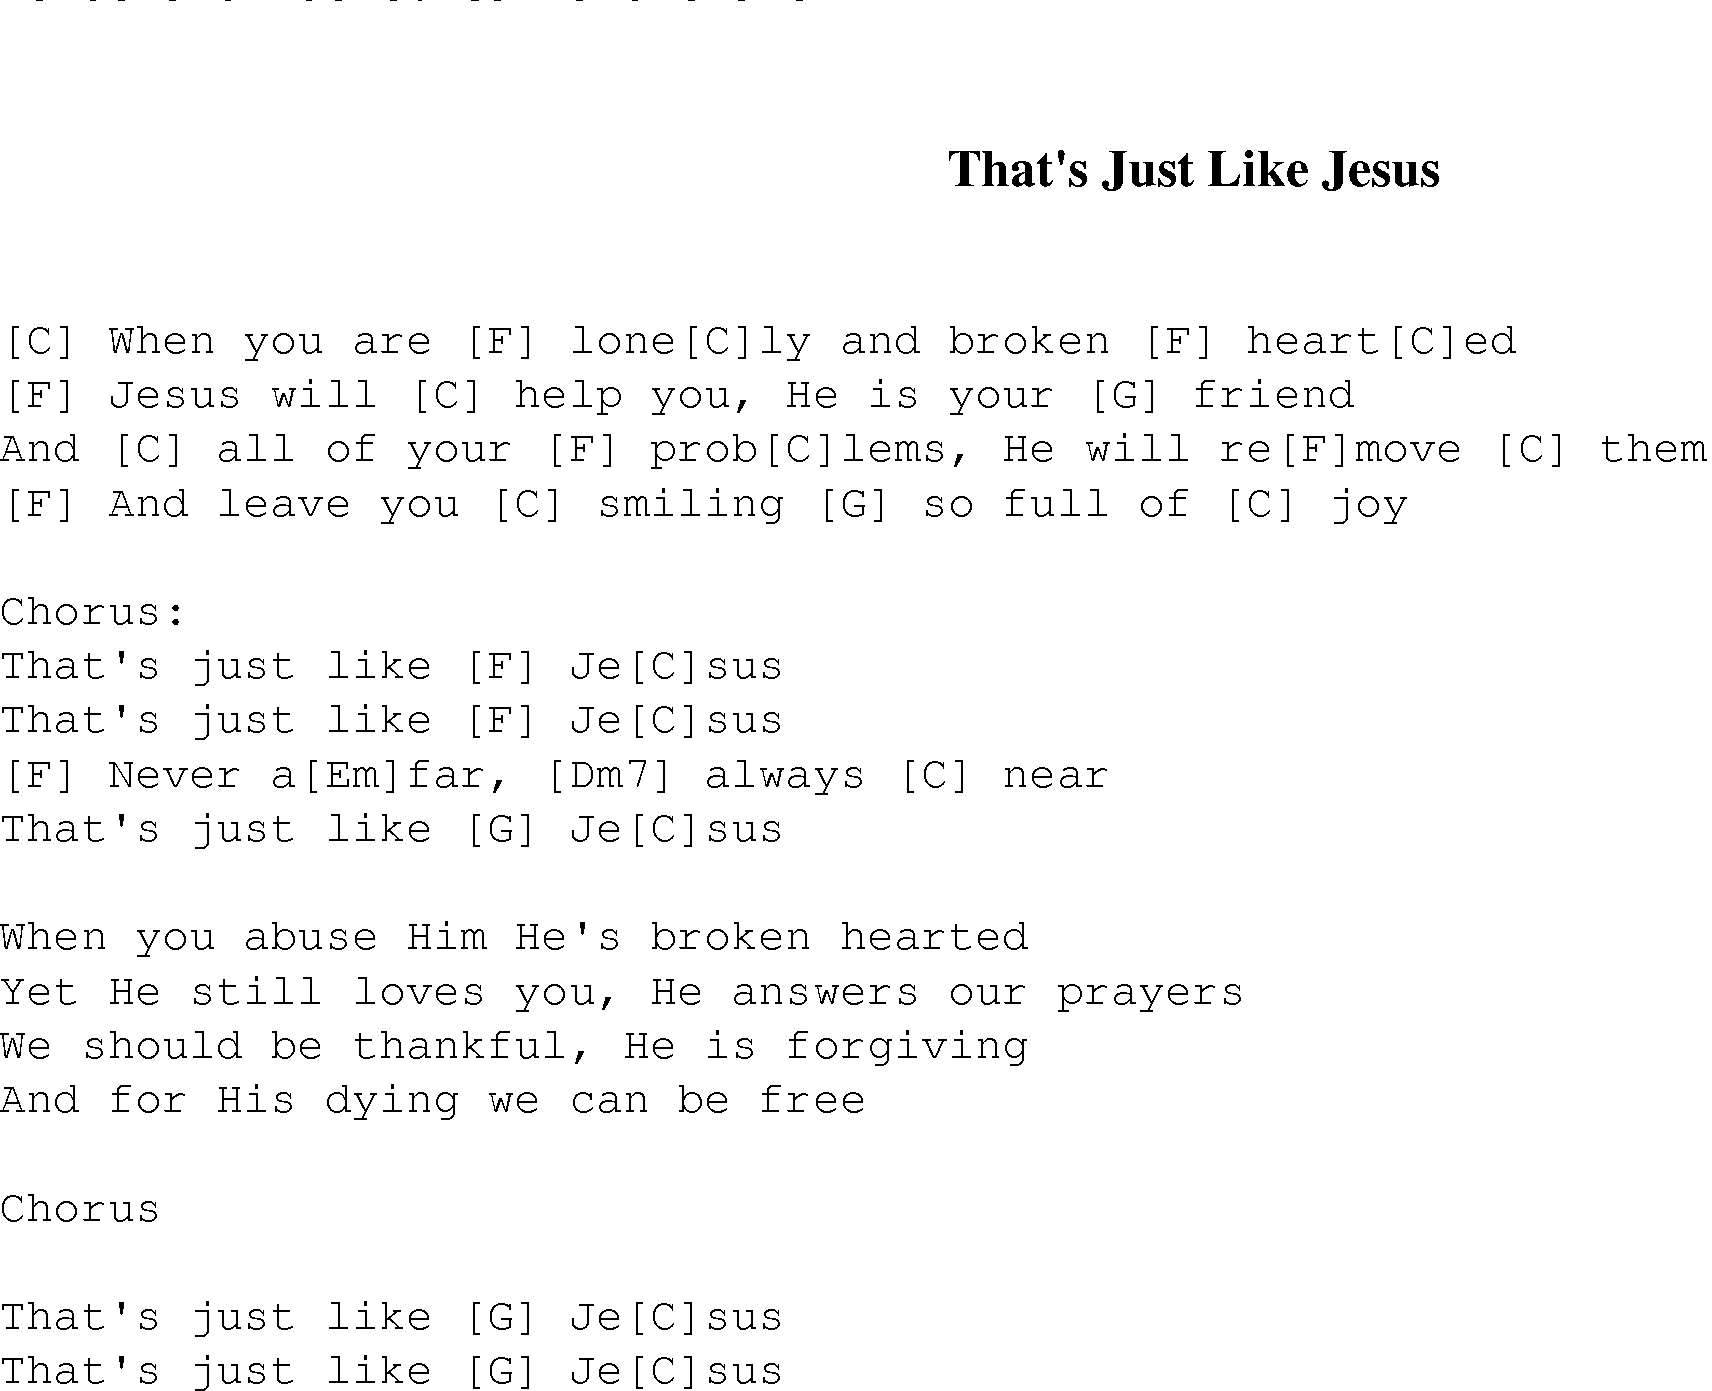 Gospel Song: thats_just_like_jesus, lyrics and chords.